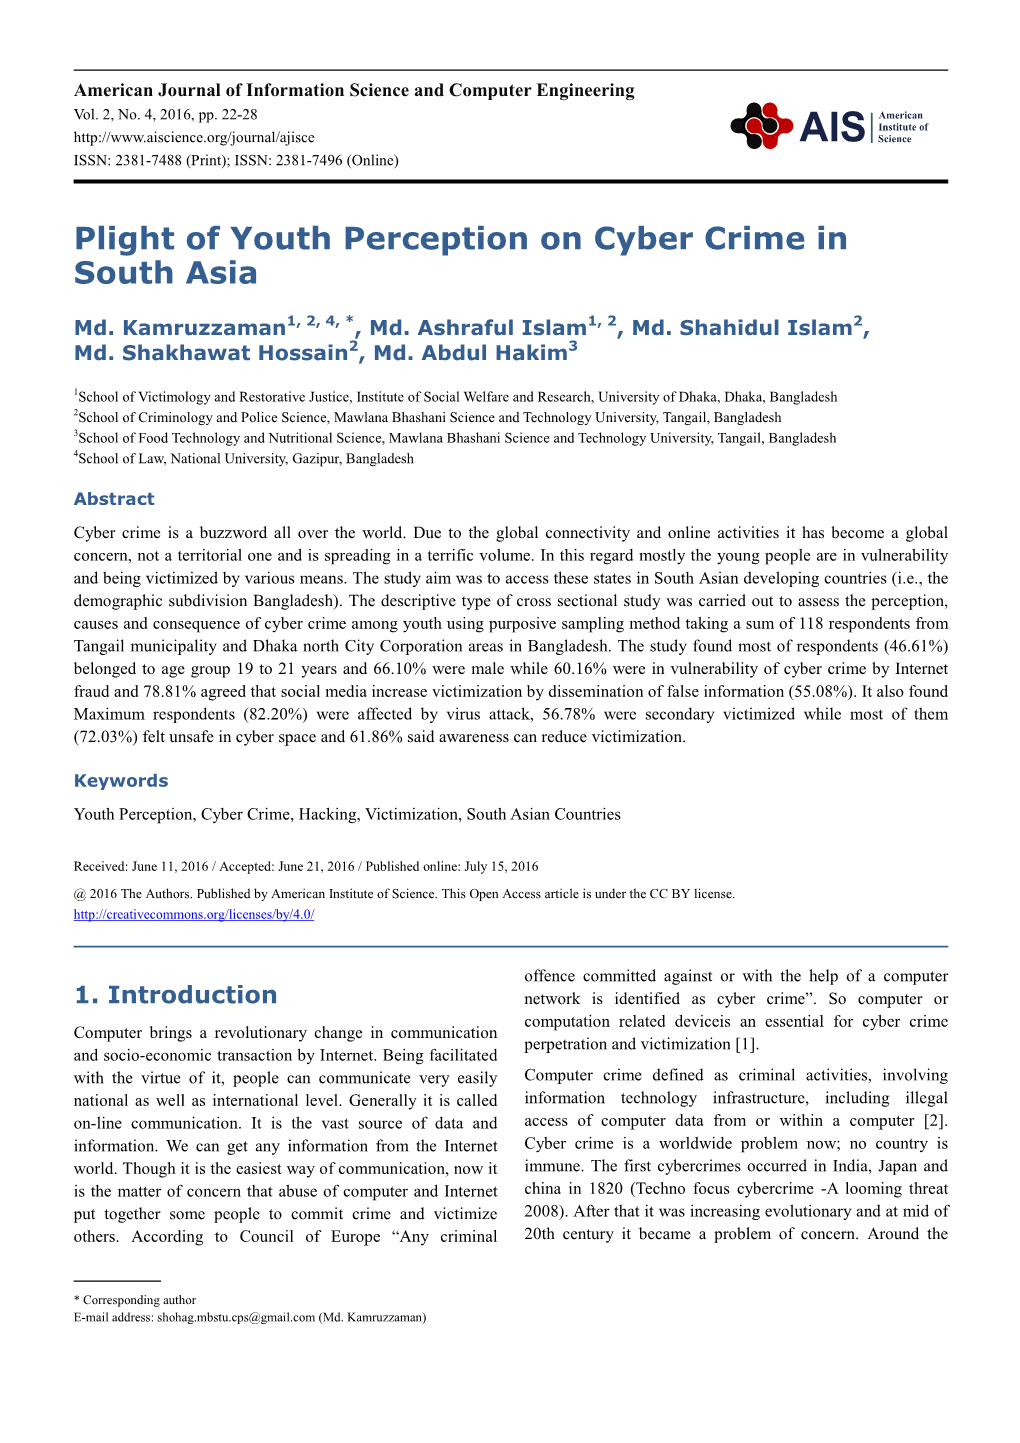 Plight of Youth Perception on Cyber Crime in South Asia